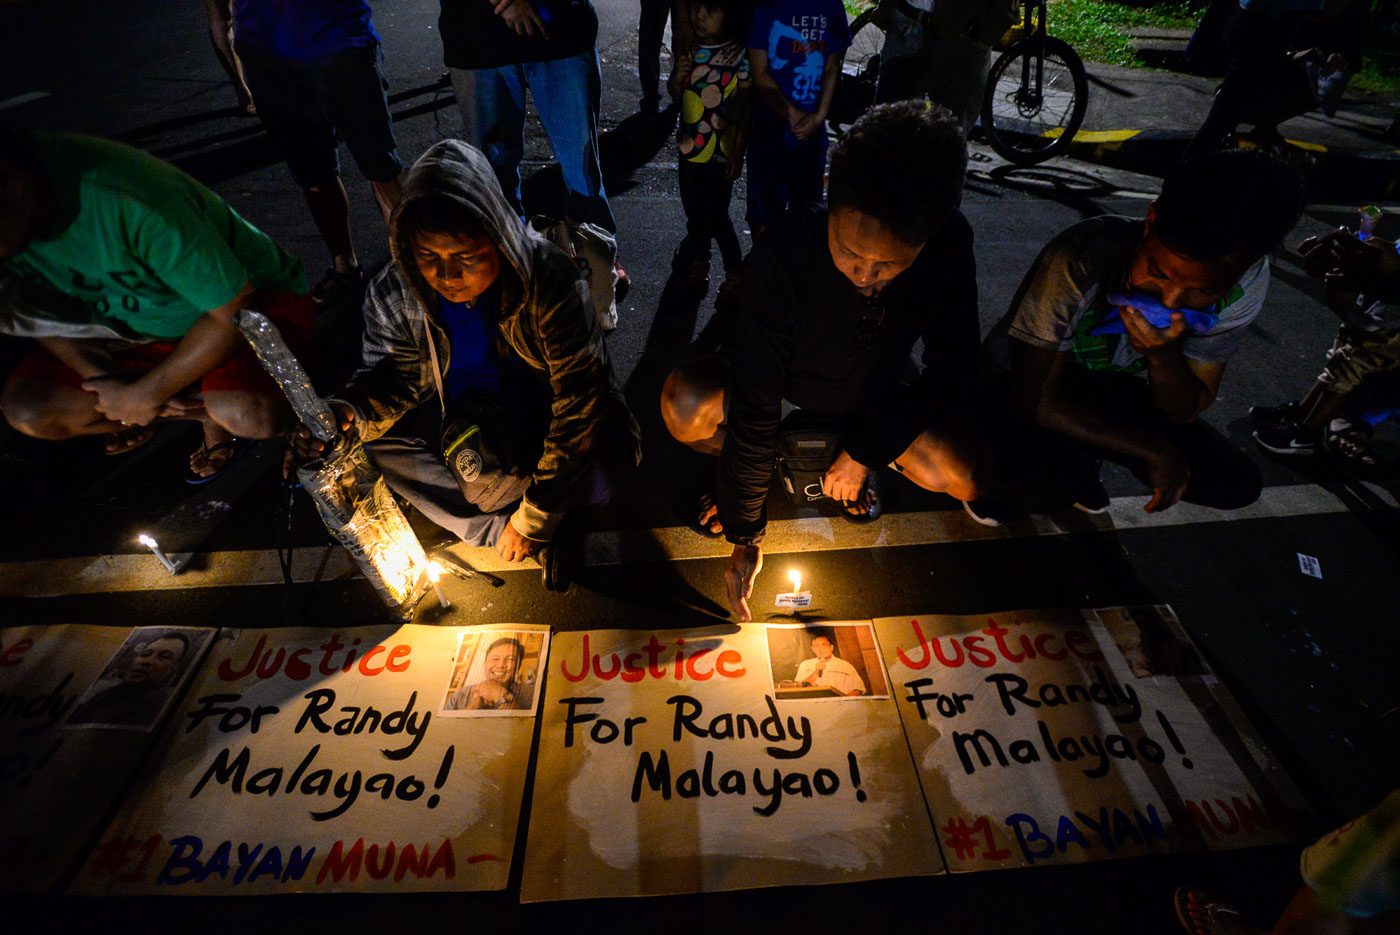 4 out of 5 Filipinos worry over extrajudicial killings – SWS